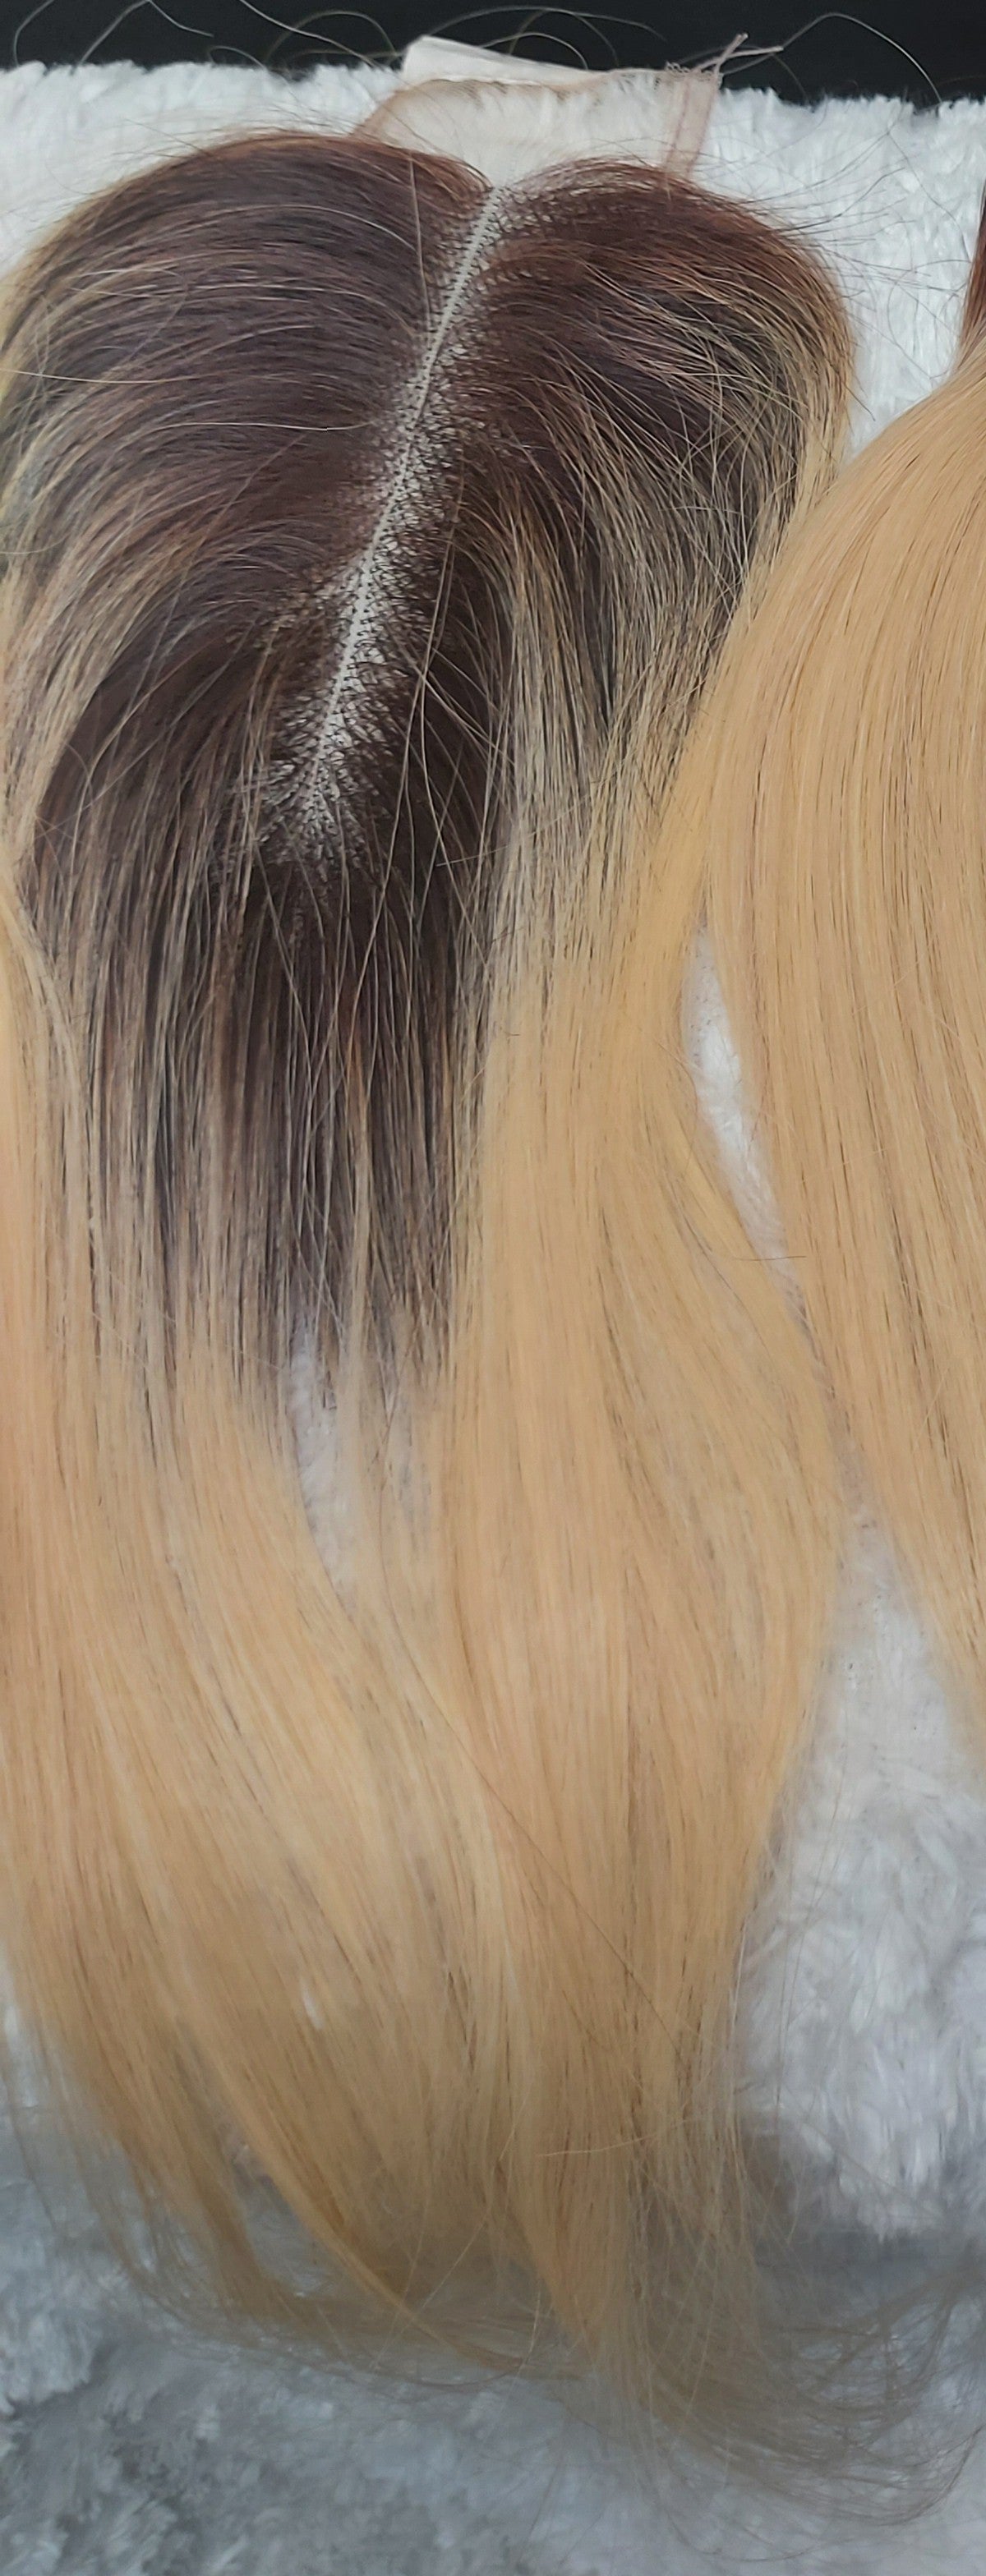 Brown on Blonde lace unit